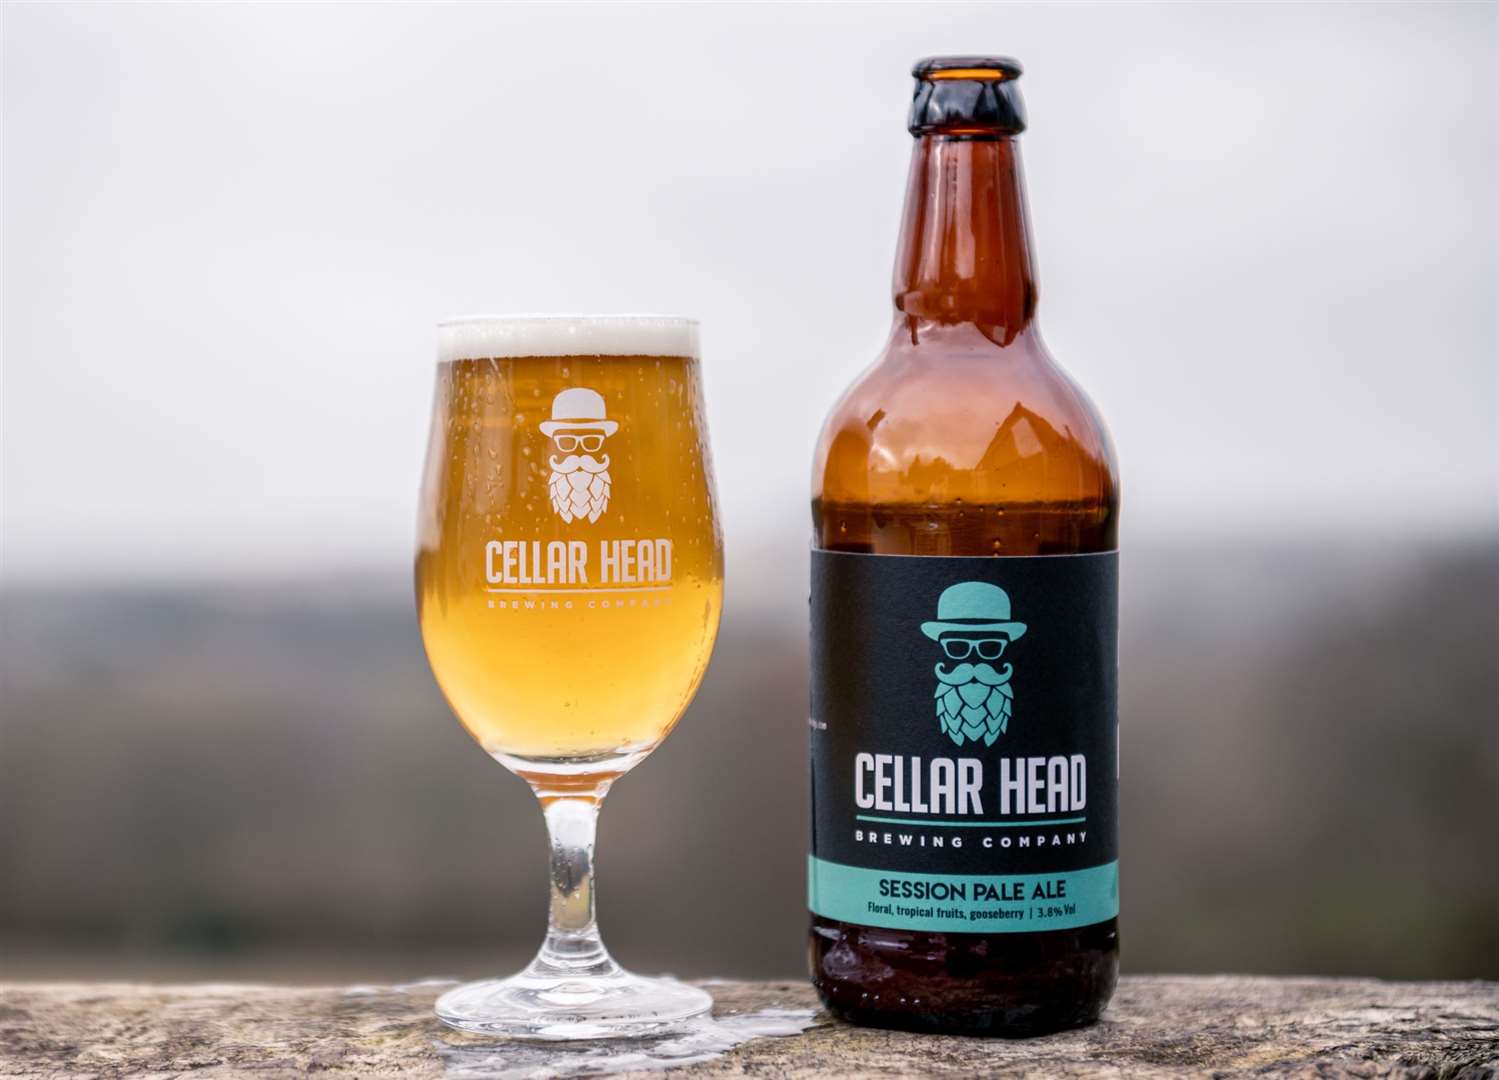 Session Pale Ale by Cellar Head Brewing Co was Kent Beer of the Year